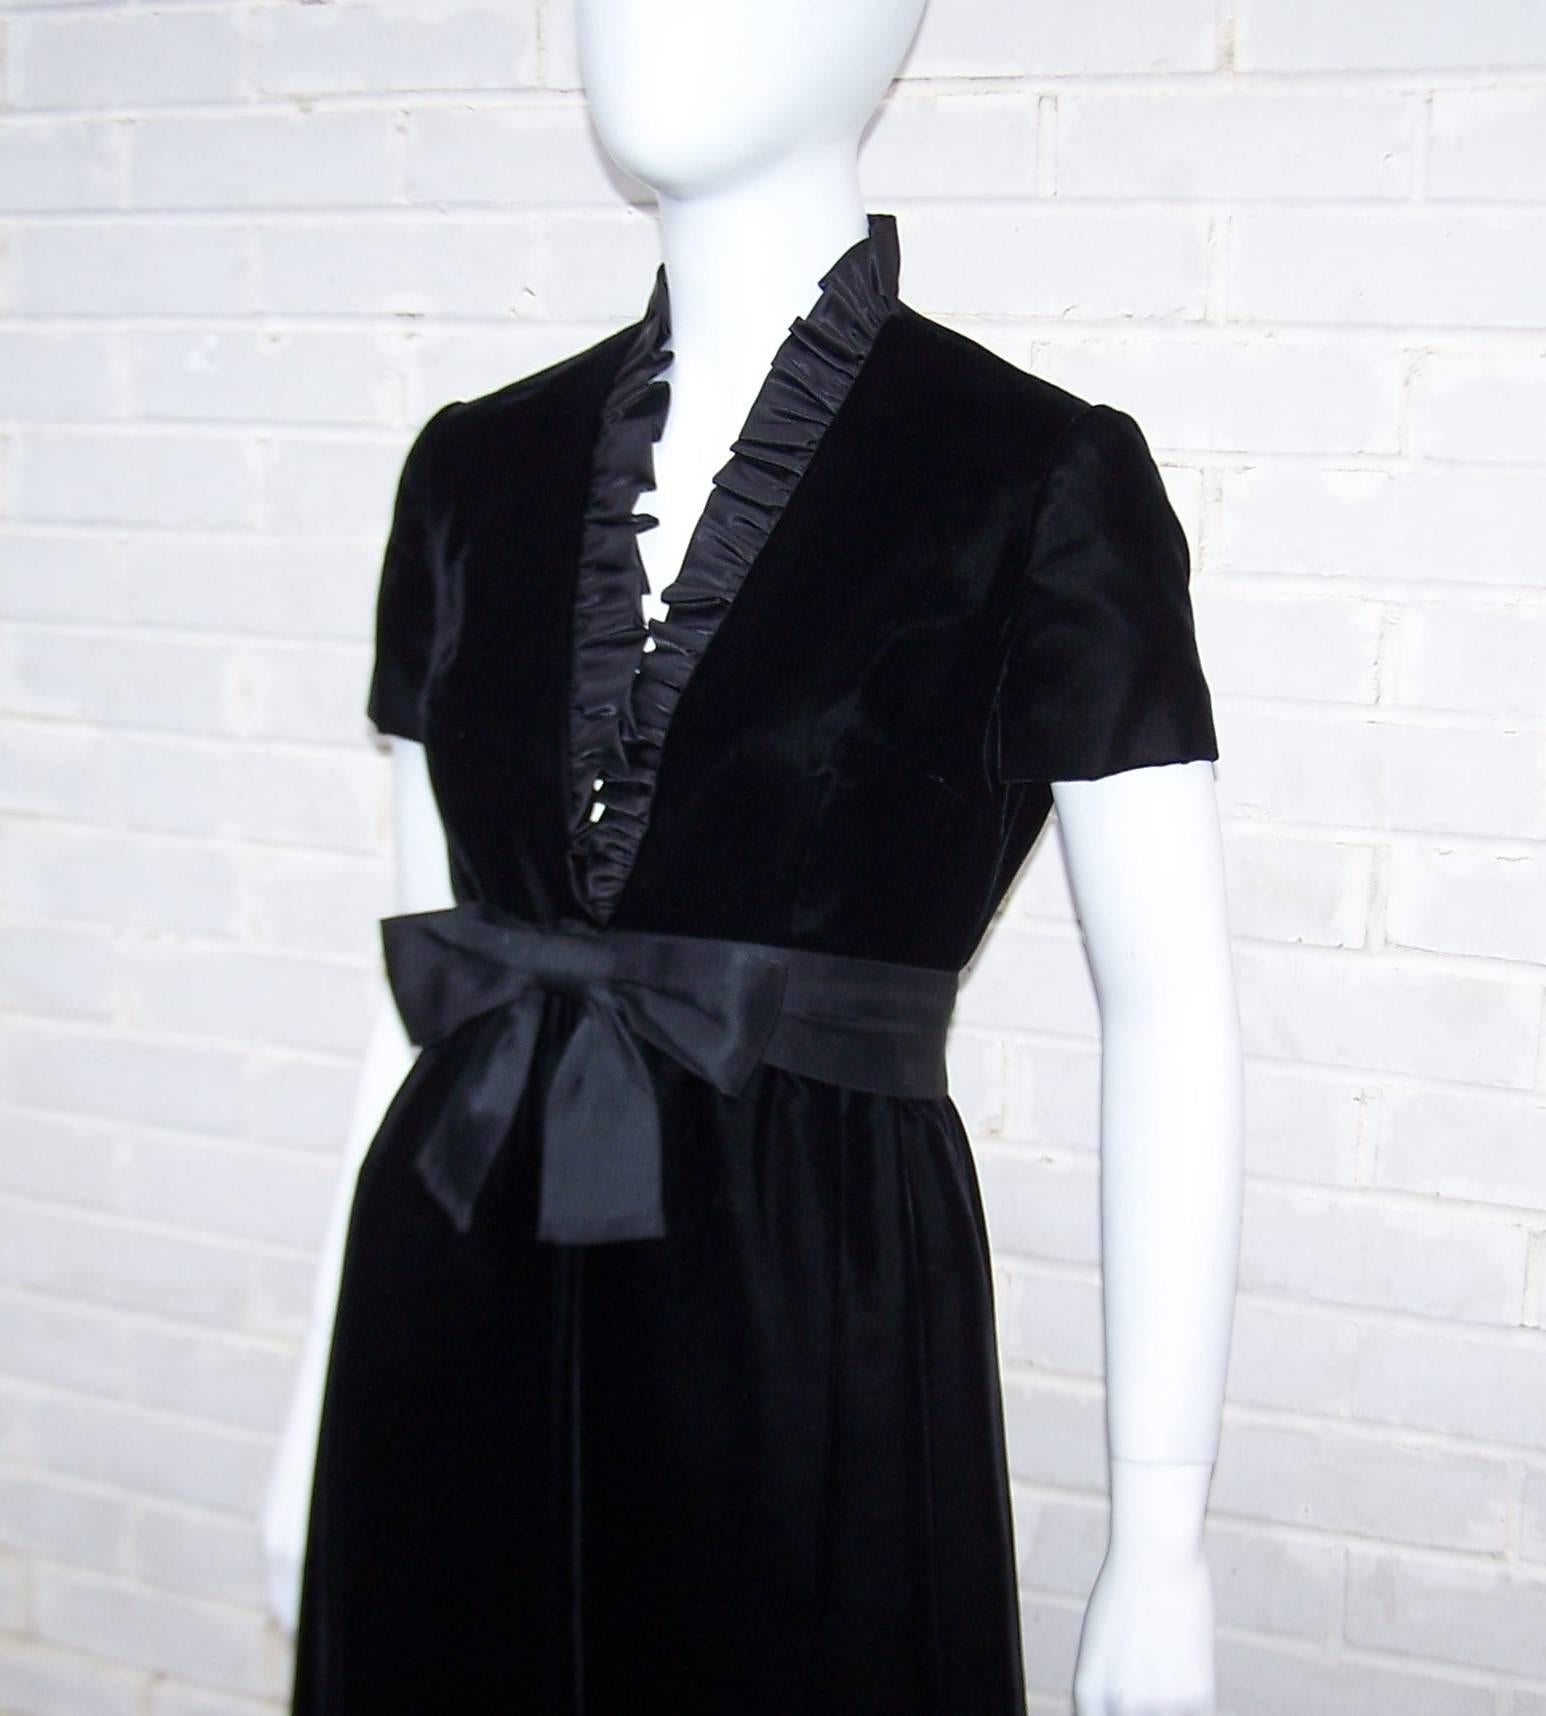 Both simple and dramatic at the same time, this c.1970 black velvet dress from Saks Fifth Avenue's Park Avenue Room has a ruffled plunging neckline perfect for strategically revealing decolletage.  It zips and hooks at the back with a modified